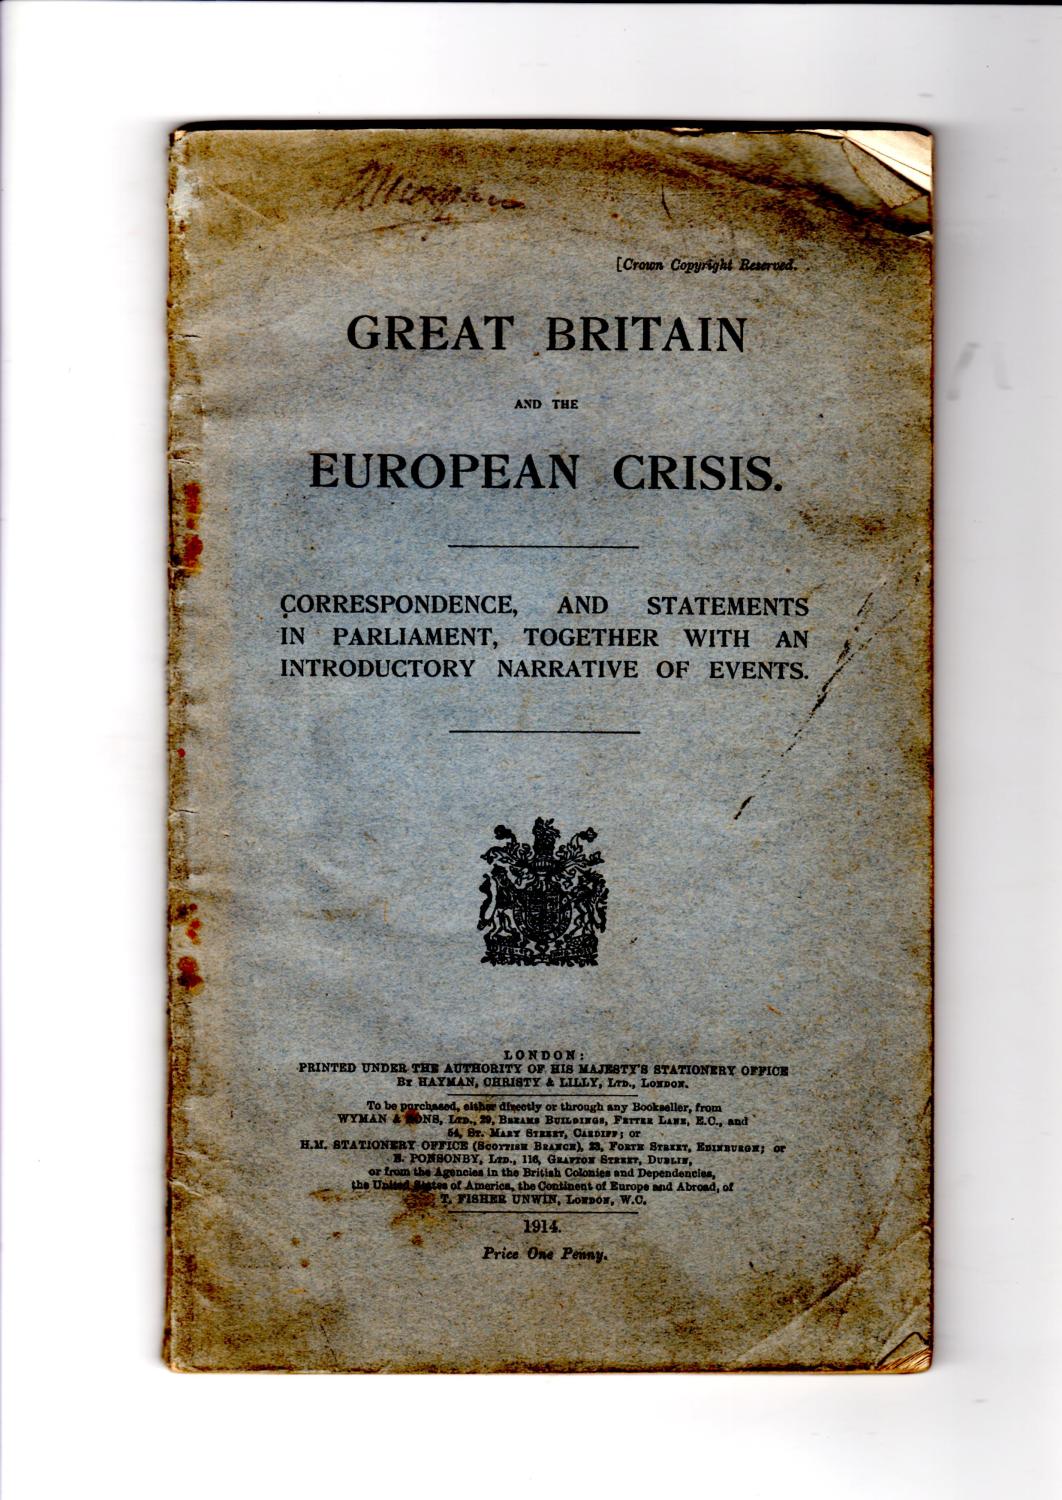 Great Britain and the European Crisis. Correspondence, and Statements in Parliament, Together with an Introductory Narrative of Events.